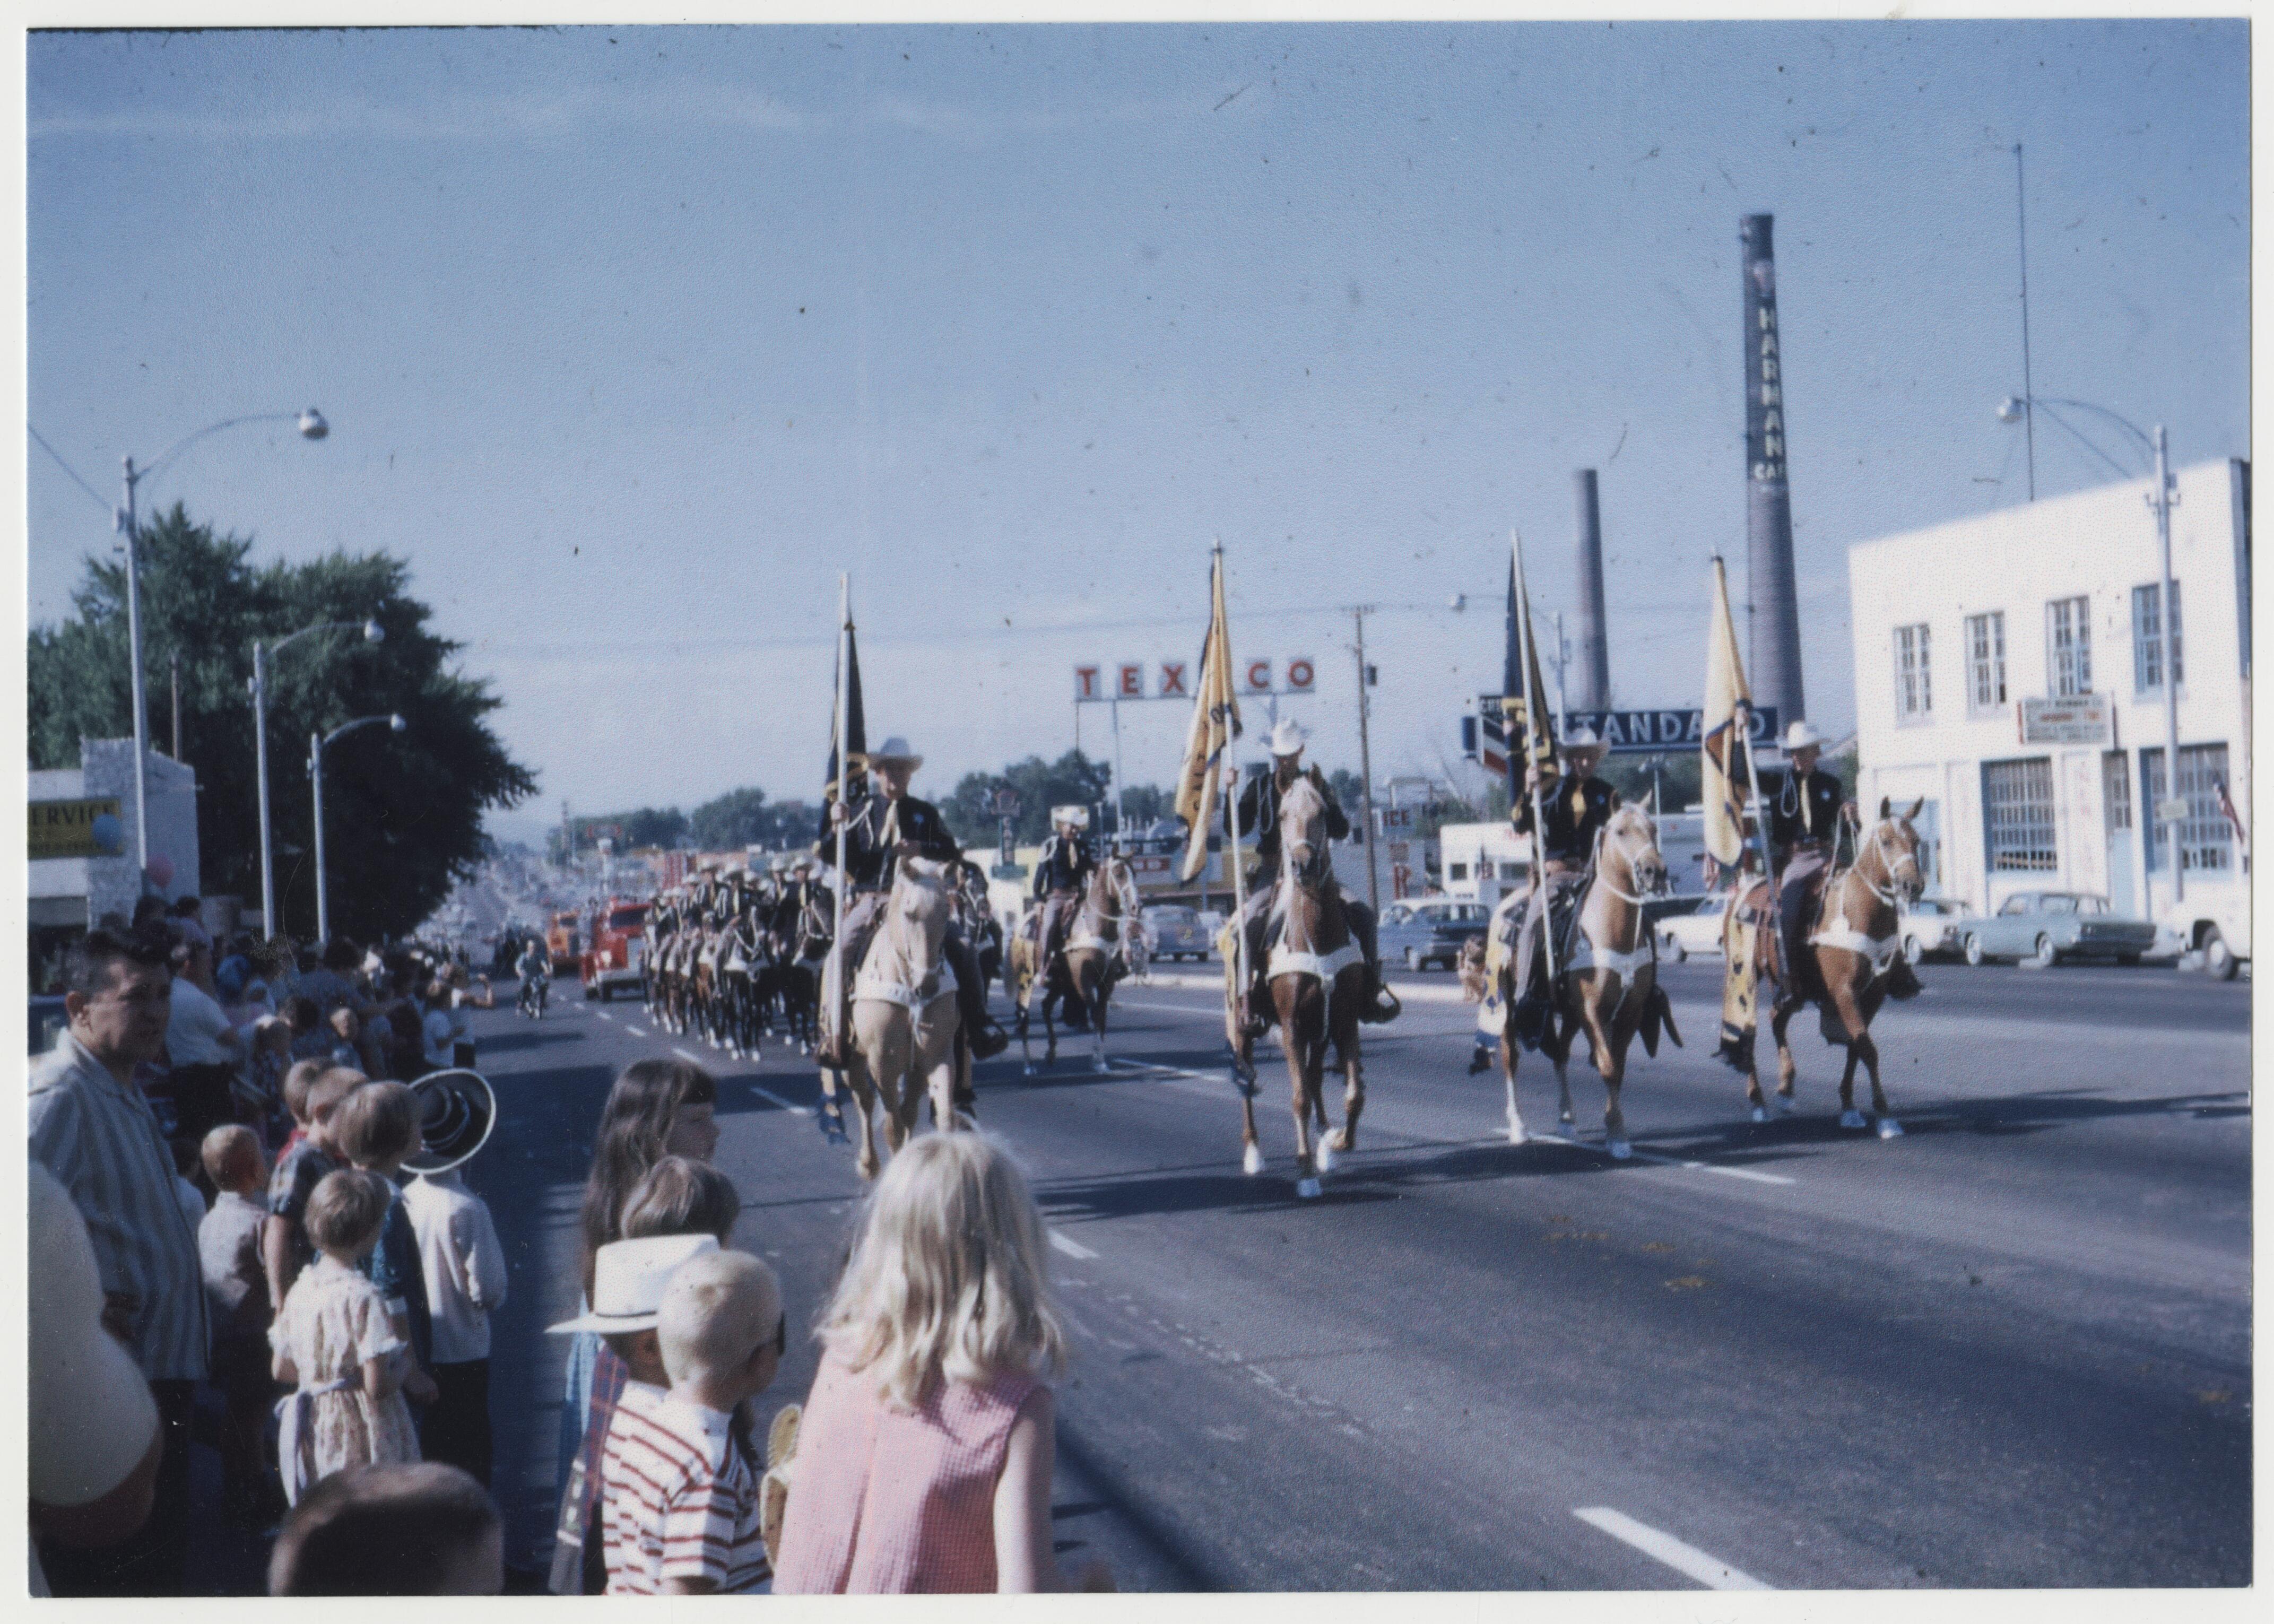 "Color Guard" Murray City Fun Day Parade c. early 1970s Murray City